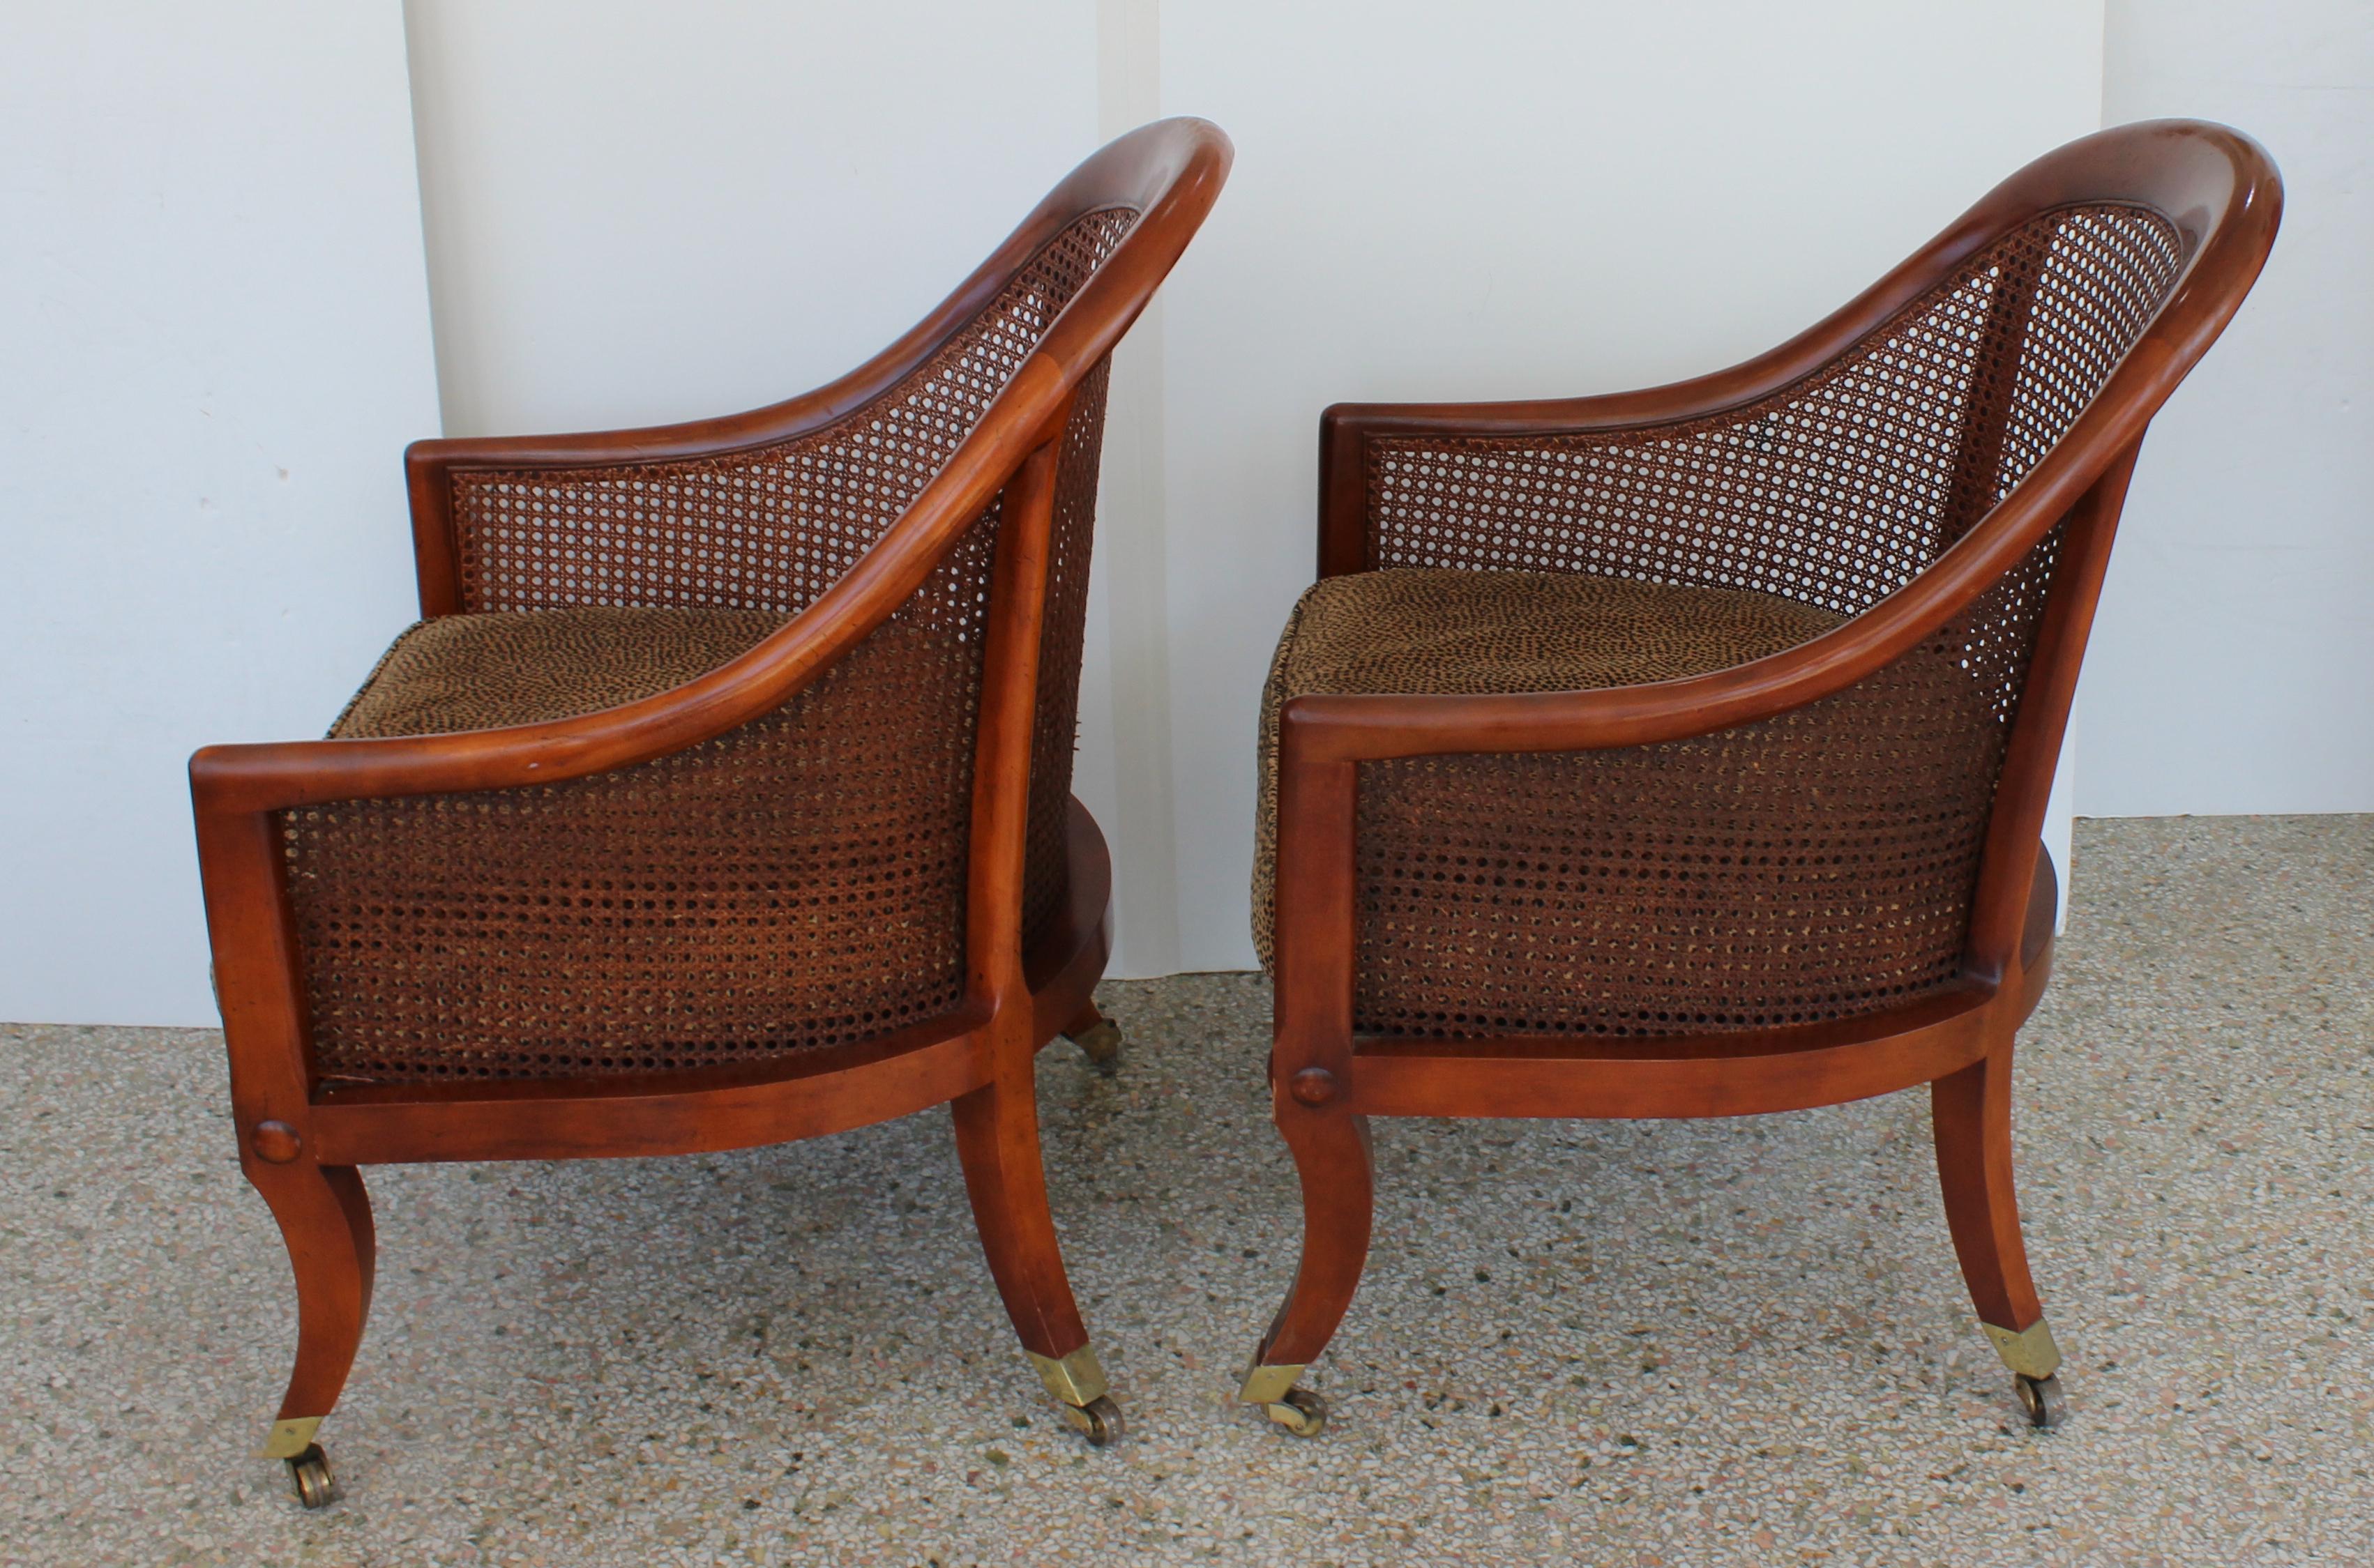 American Pair of English Regency Style Chairs by Baker Furniture